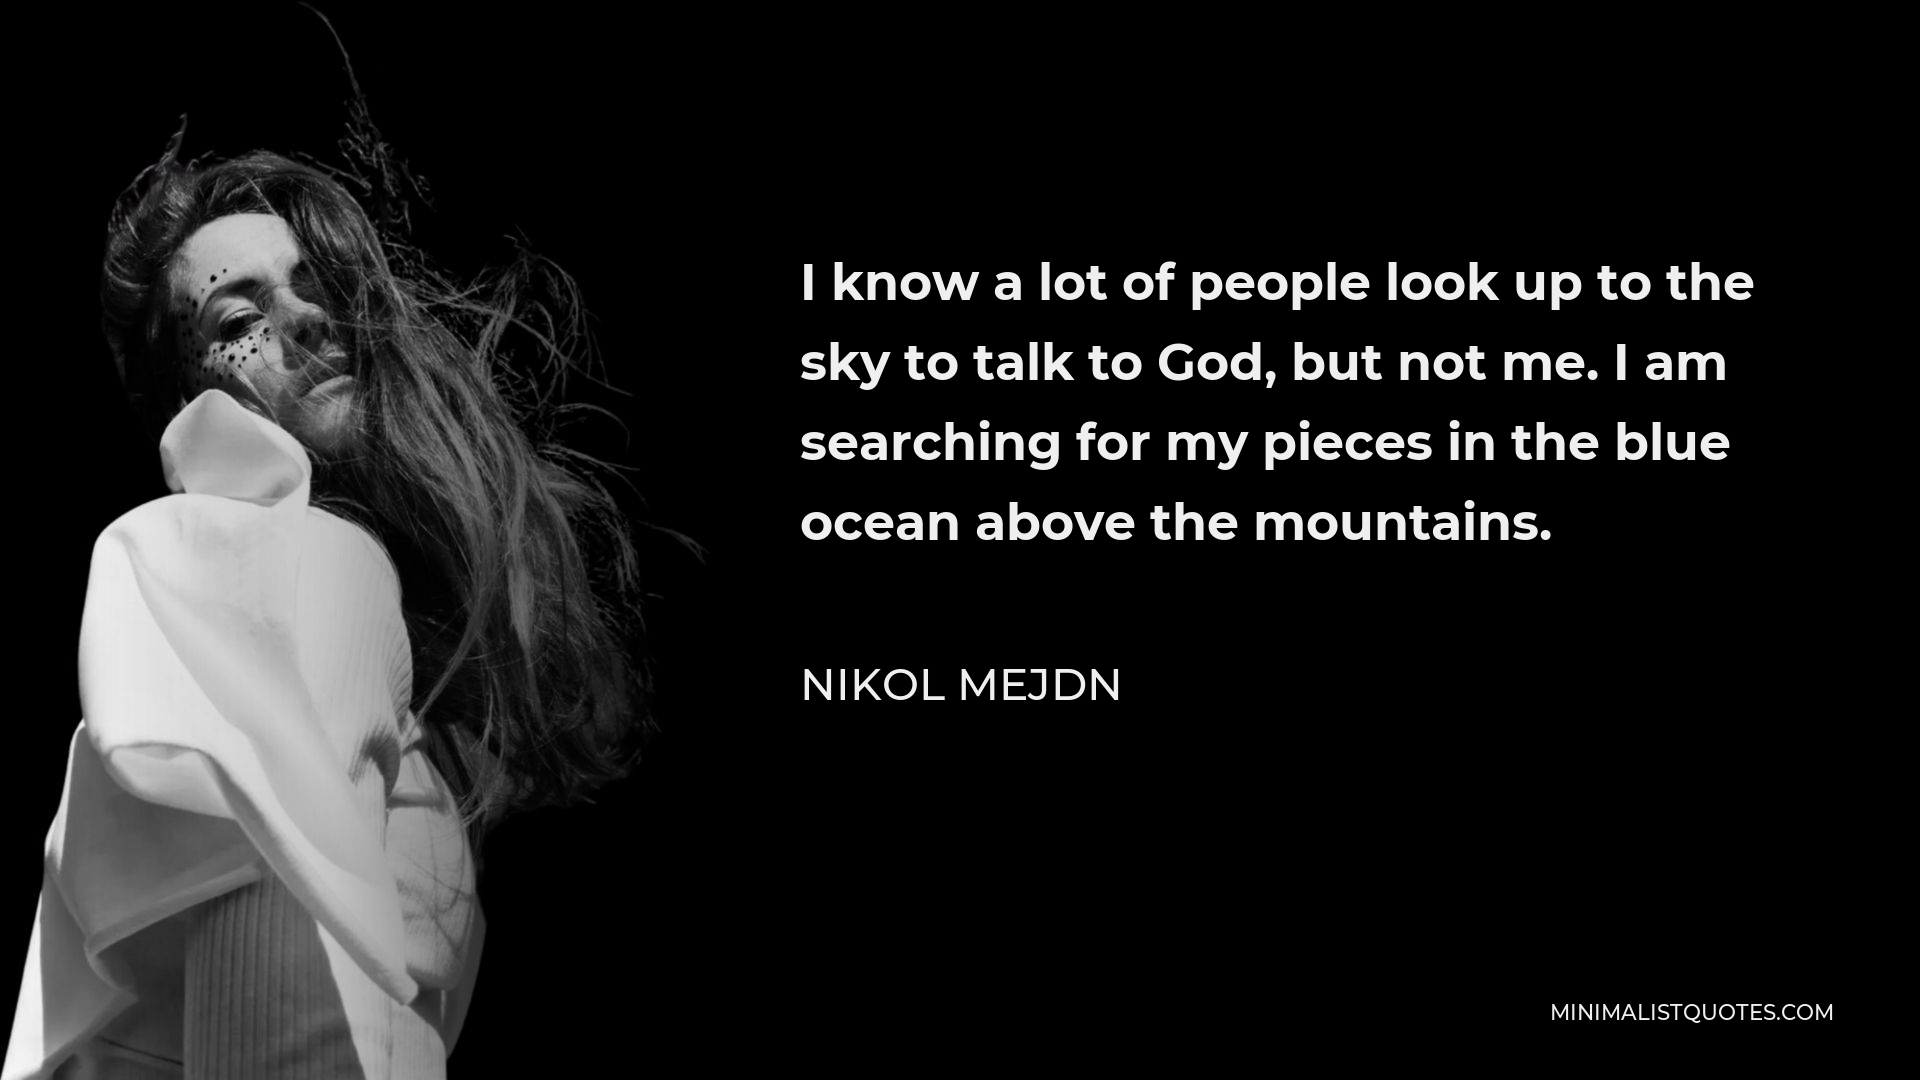 Nikol Mejdn Quote - I know a lot of people look up to the sky to talk to God, but not me. I am searching for my pieces in the blue ocean above the mountains.